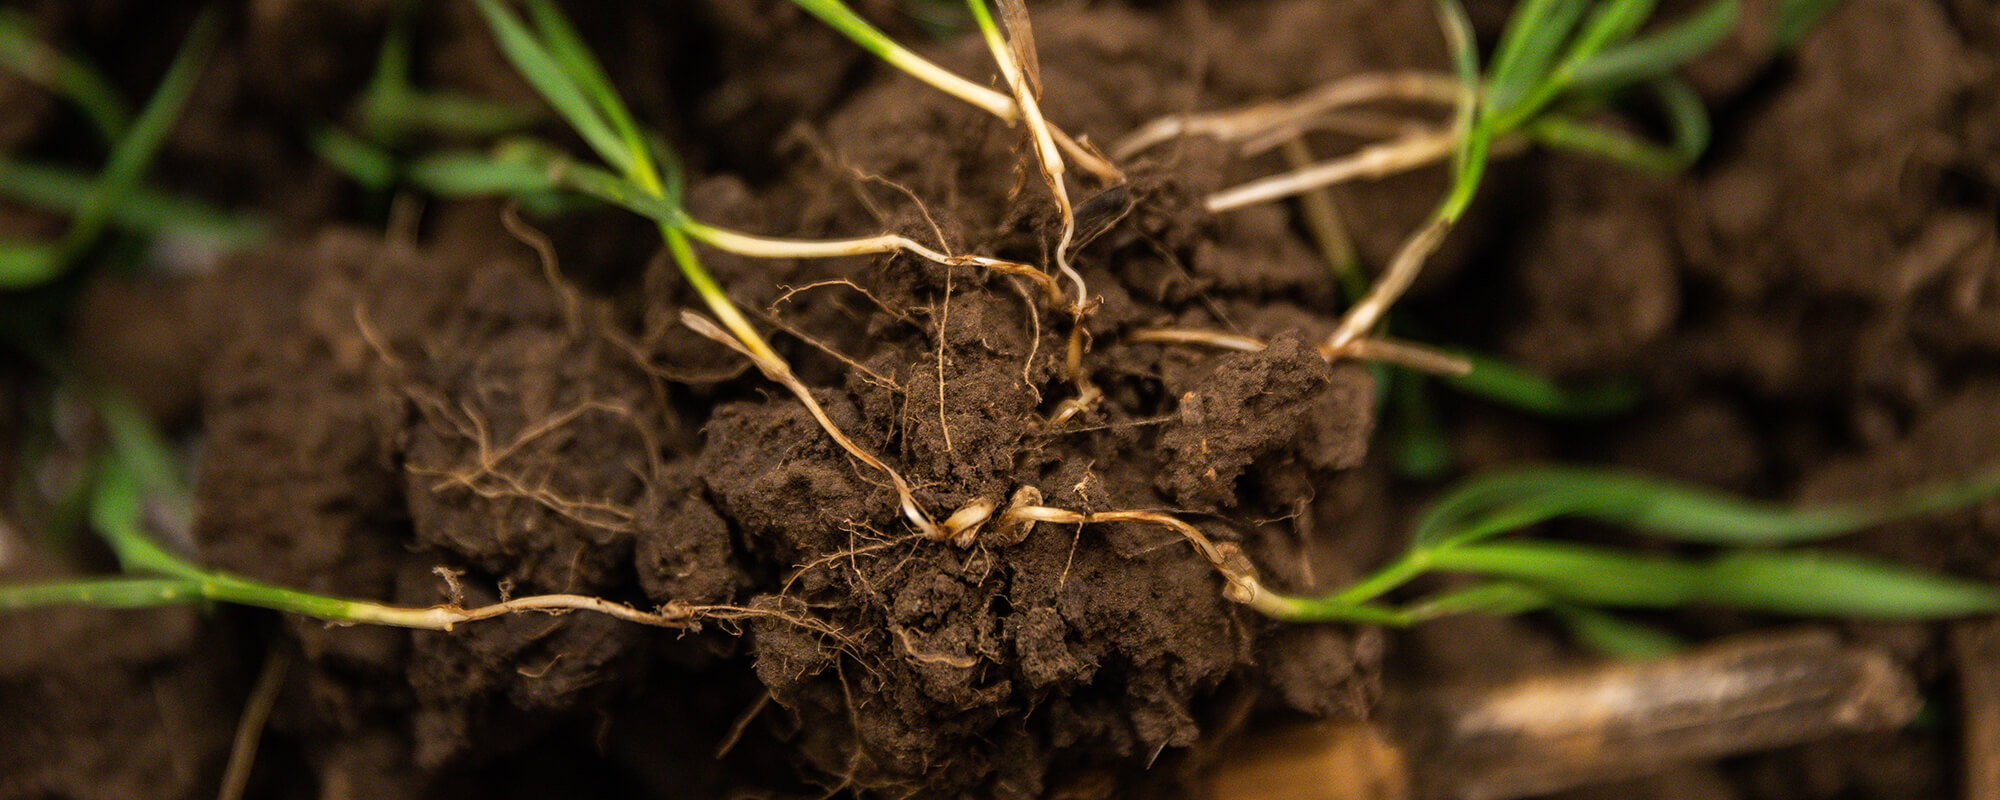 Soil with plant roots growing in it